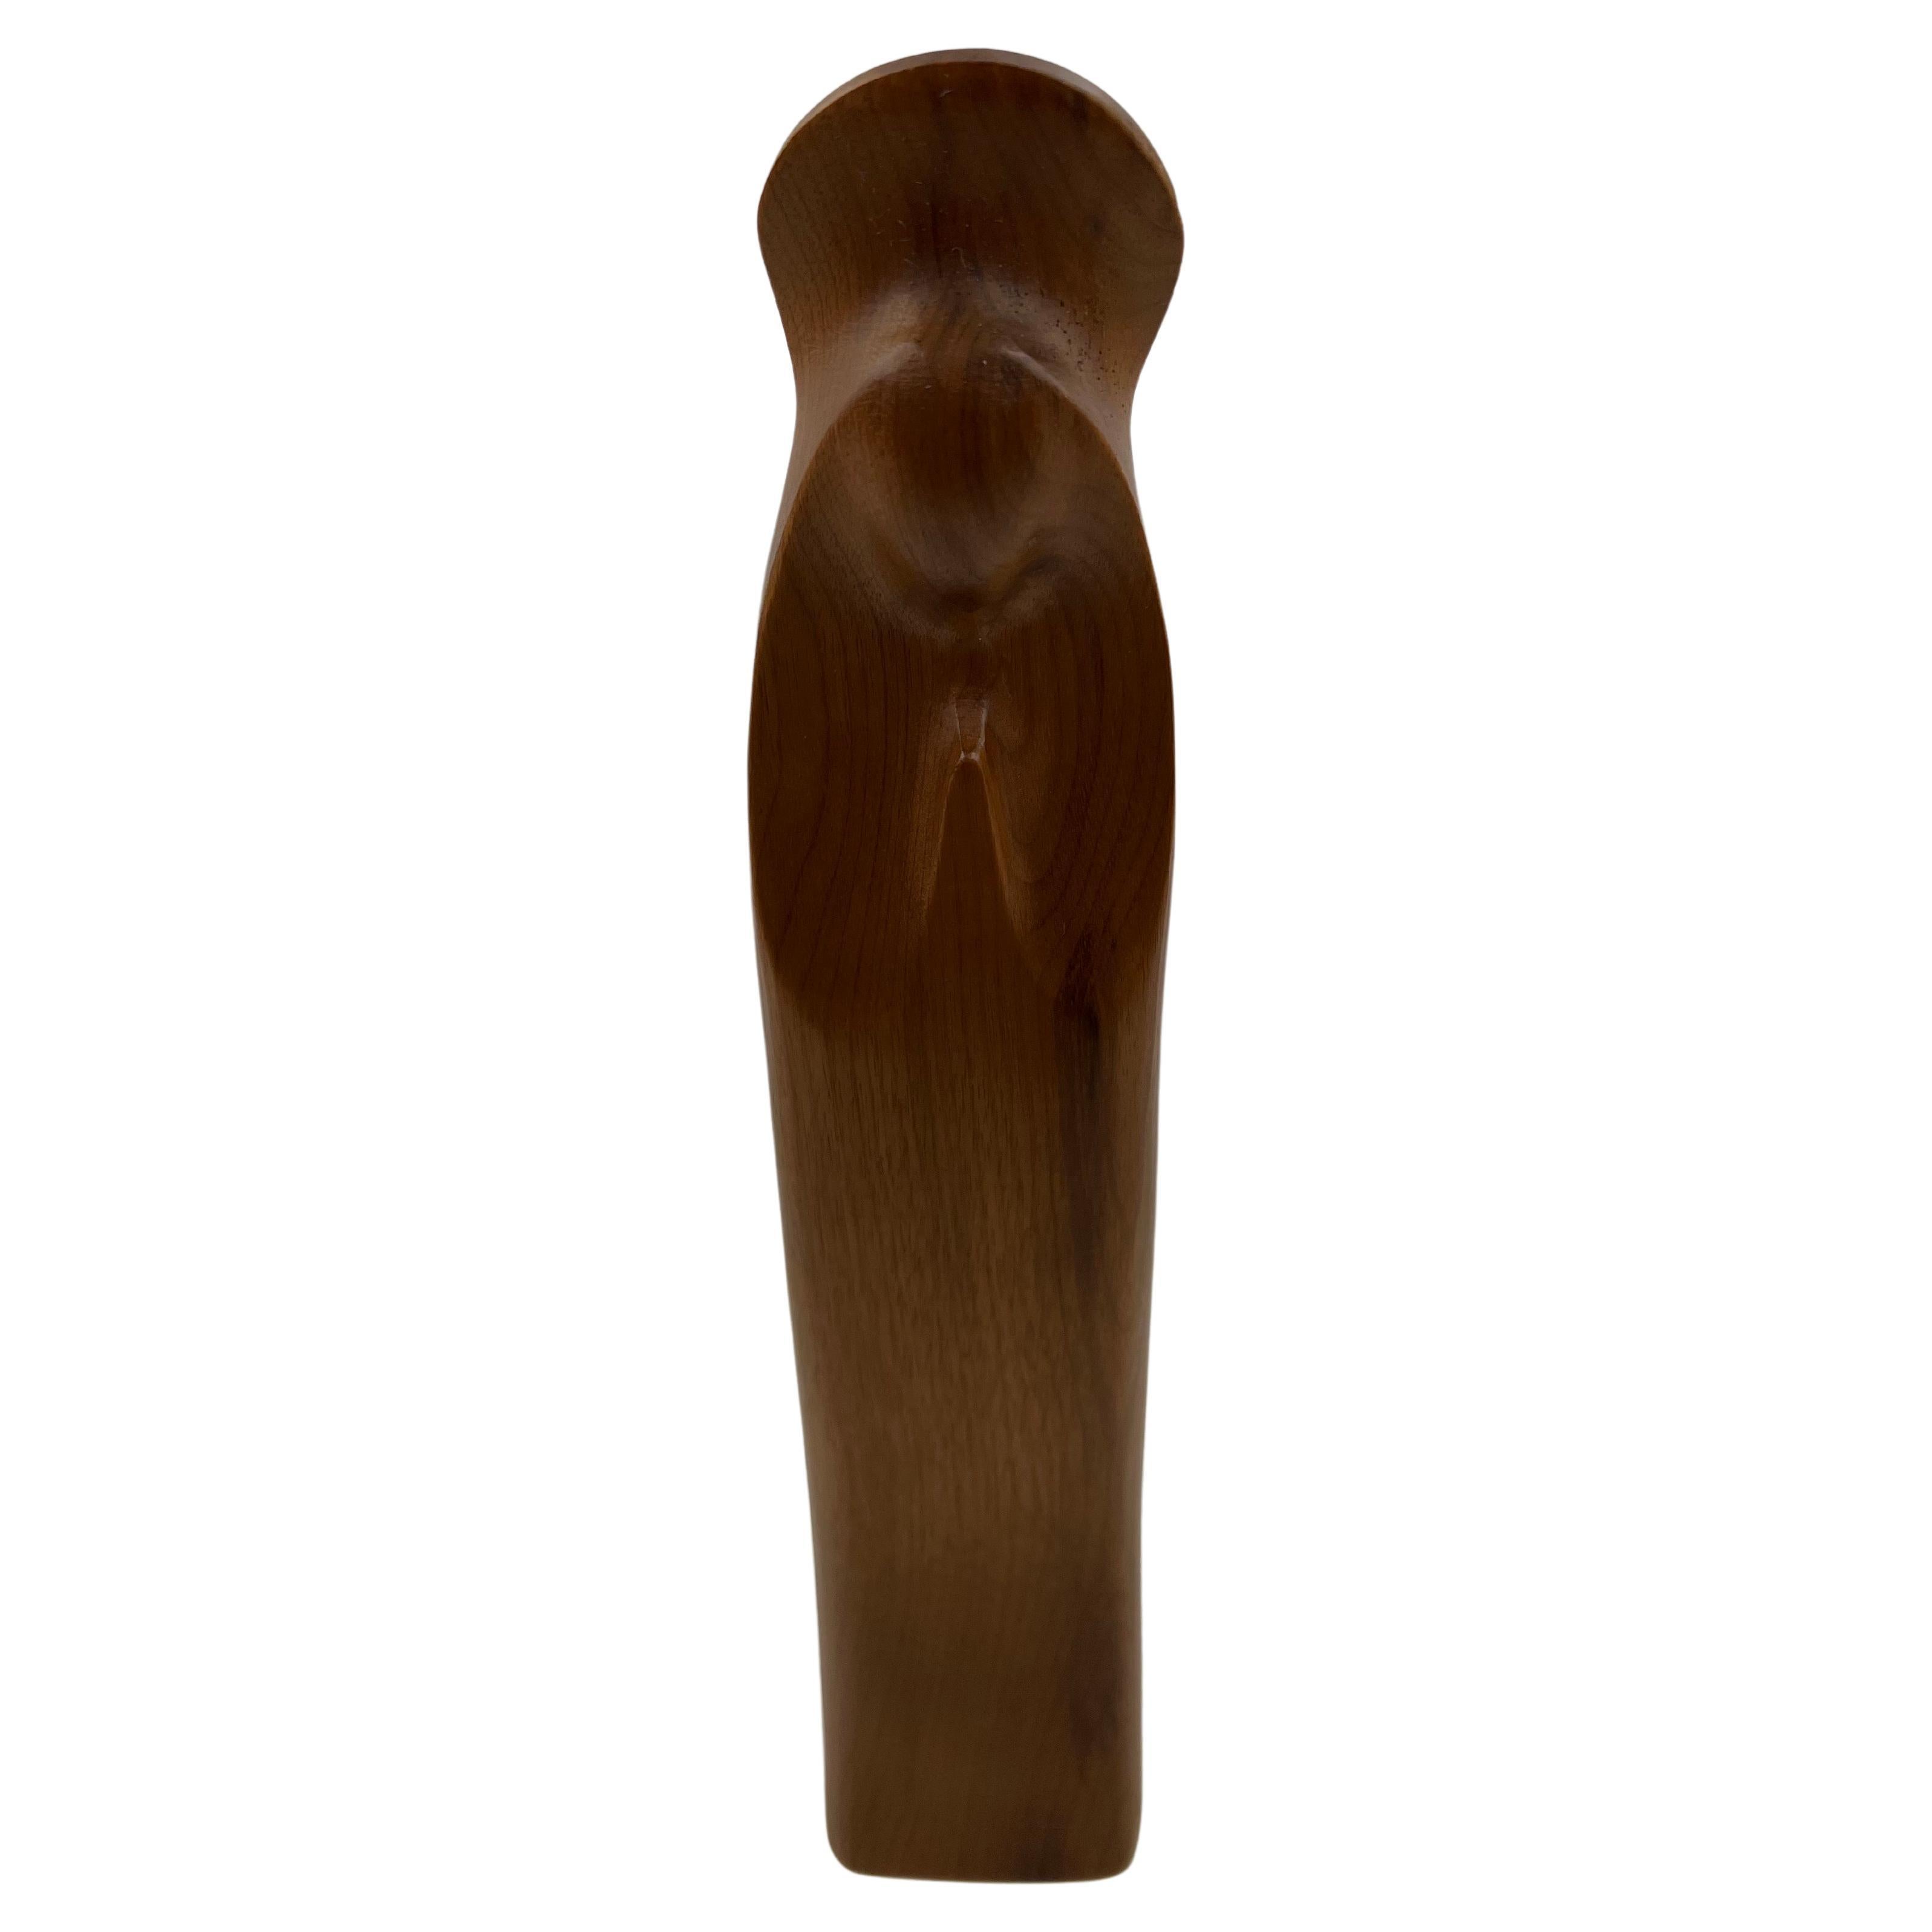 A beautiful modernist hand-carved solid walnut Madona virgin sculpture, circa 1960's great condition.